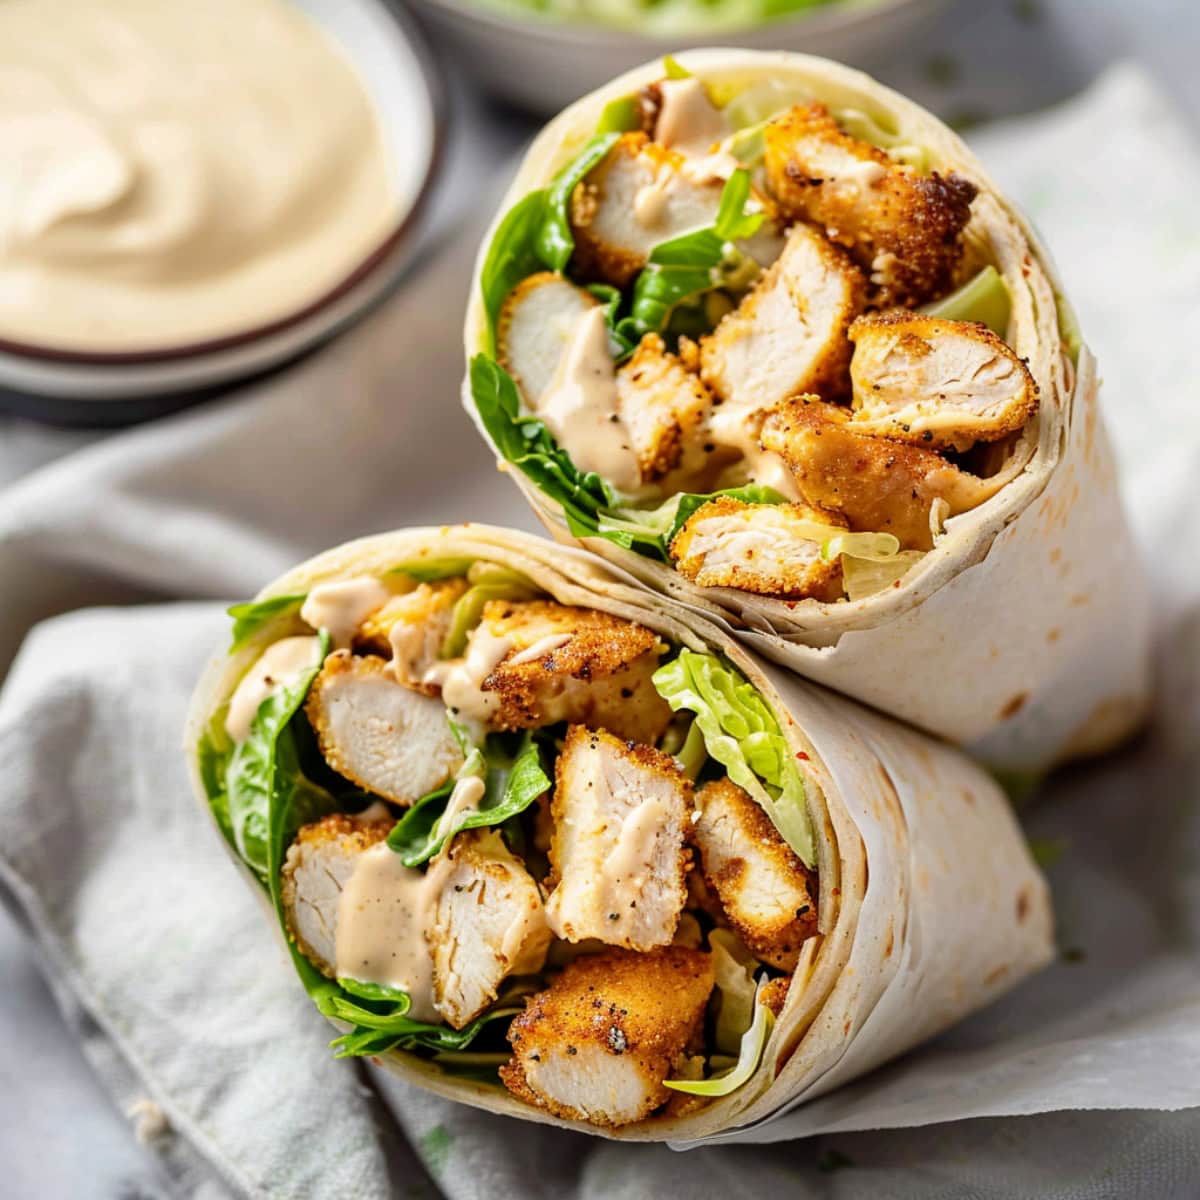 An appetizing Caesar wrap cut sliced, showing layers of chicken, lettuce, and dressing inside a flour tortilla.